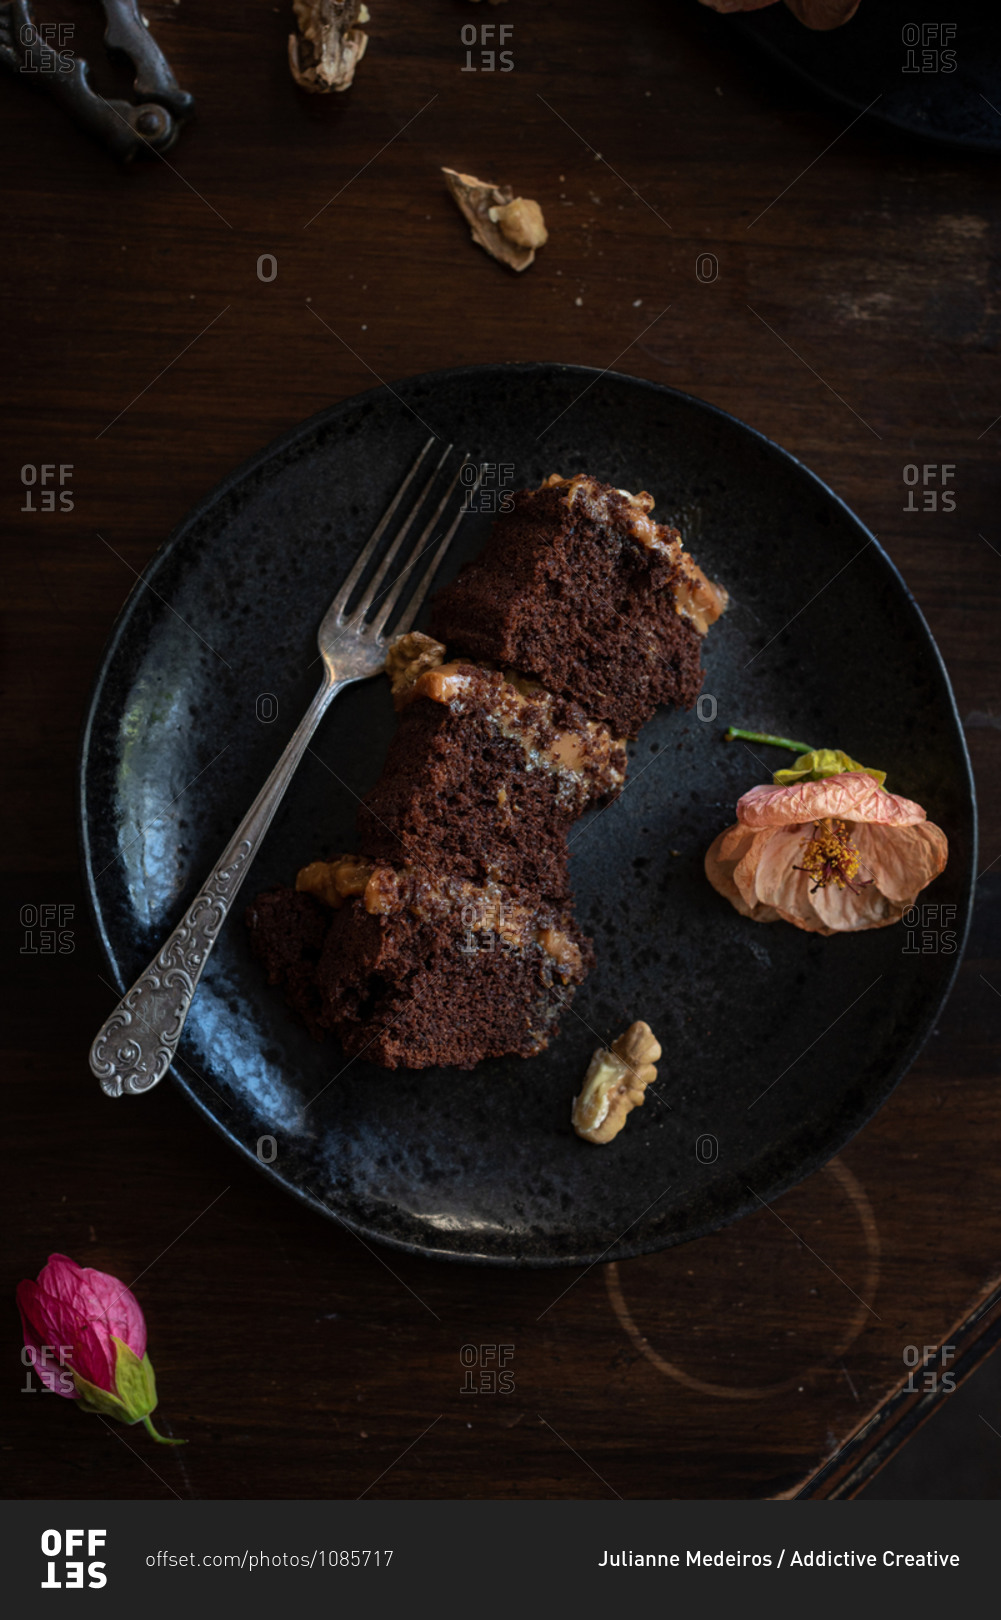 Top view of pieces of delectable layered chocolate cake with walnuts served on black plate with fork and garnished with flower buds